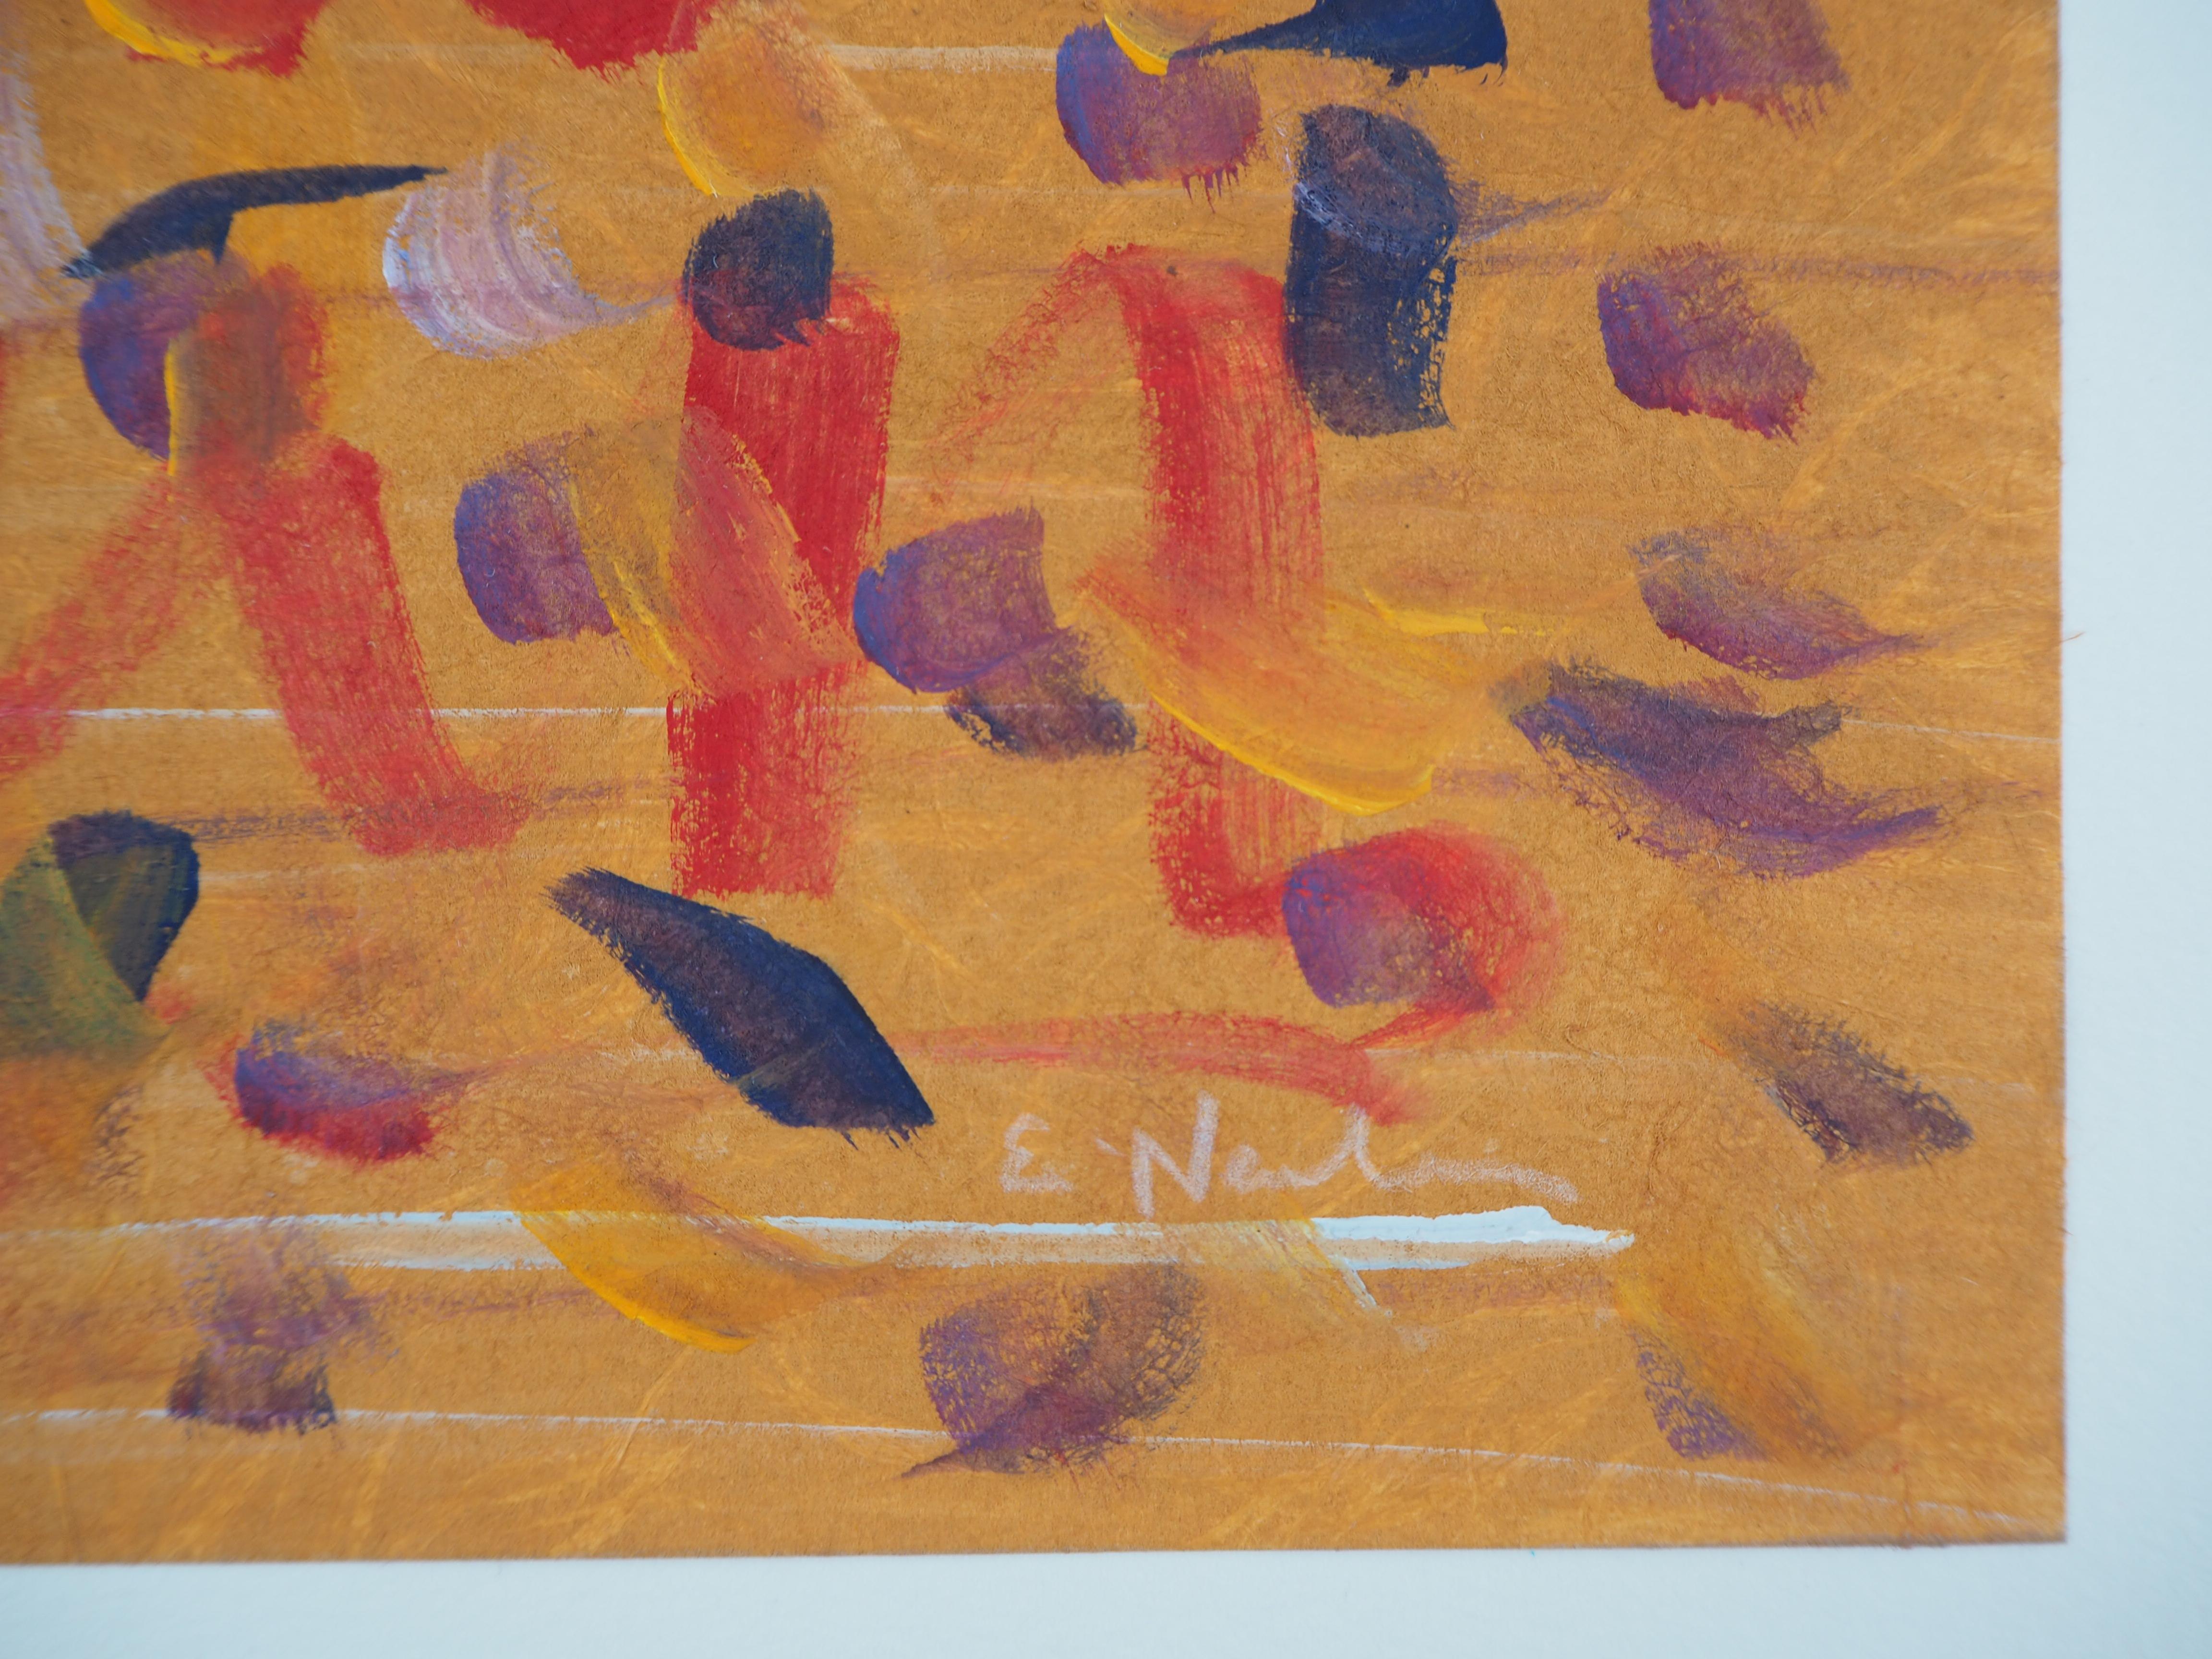 Composition Blue and Red on Orange - Original handsigned watercolor and tempera - Art by Ervin Neuhaus